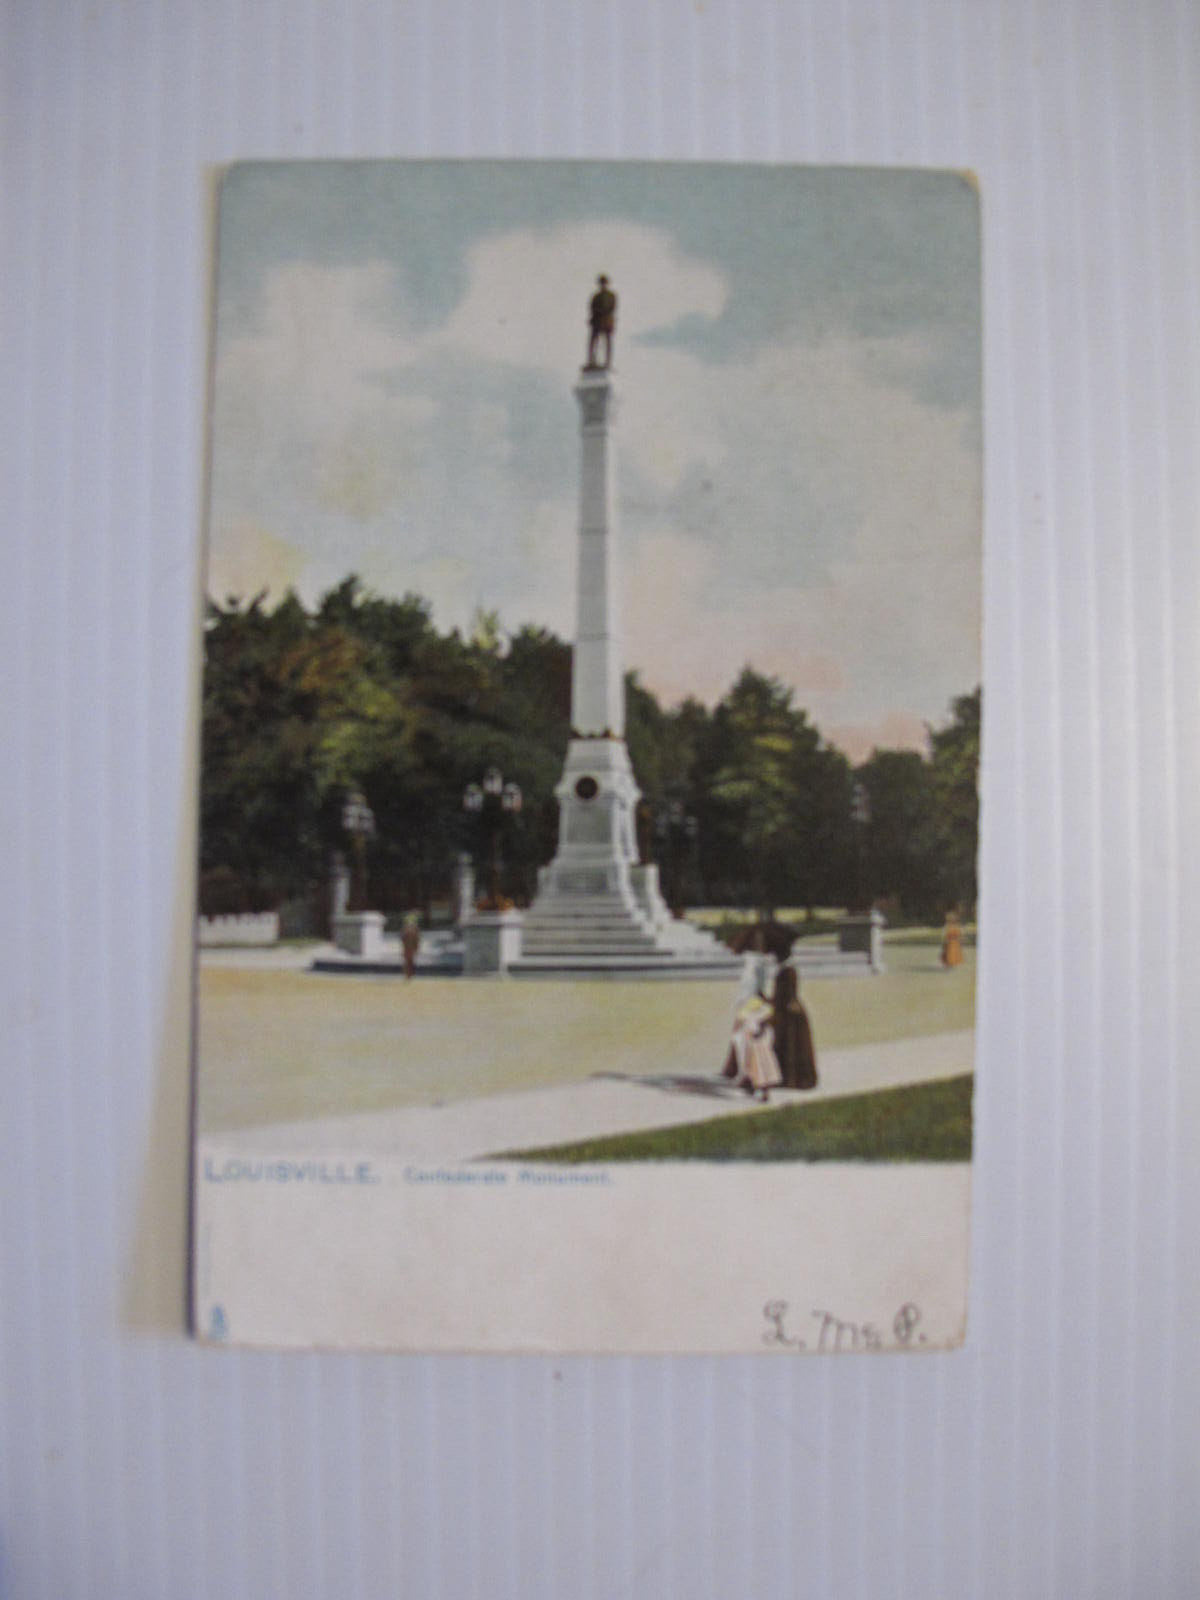 OLD POSTCARD: CONFEDERATE MONUMENT, LOUISVILLE, KY. CSA. POSTMARKED 1905